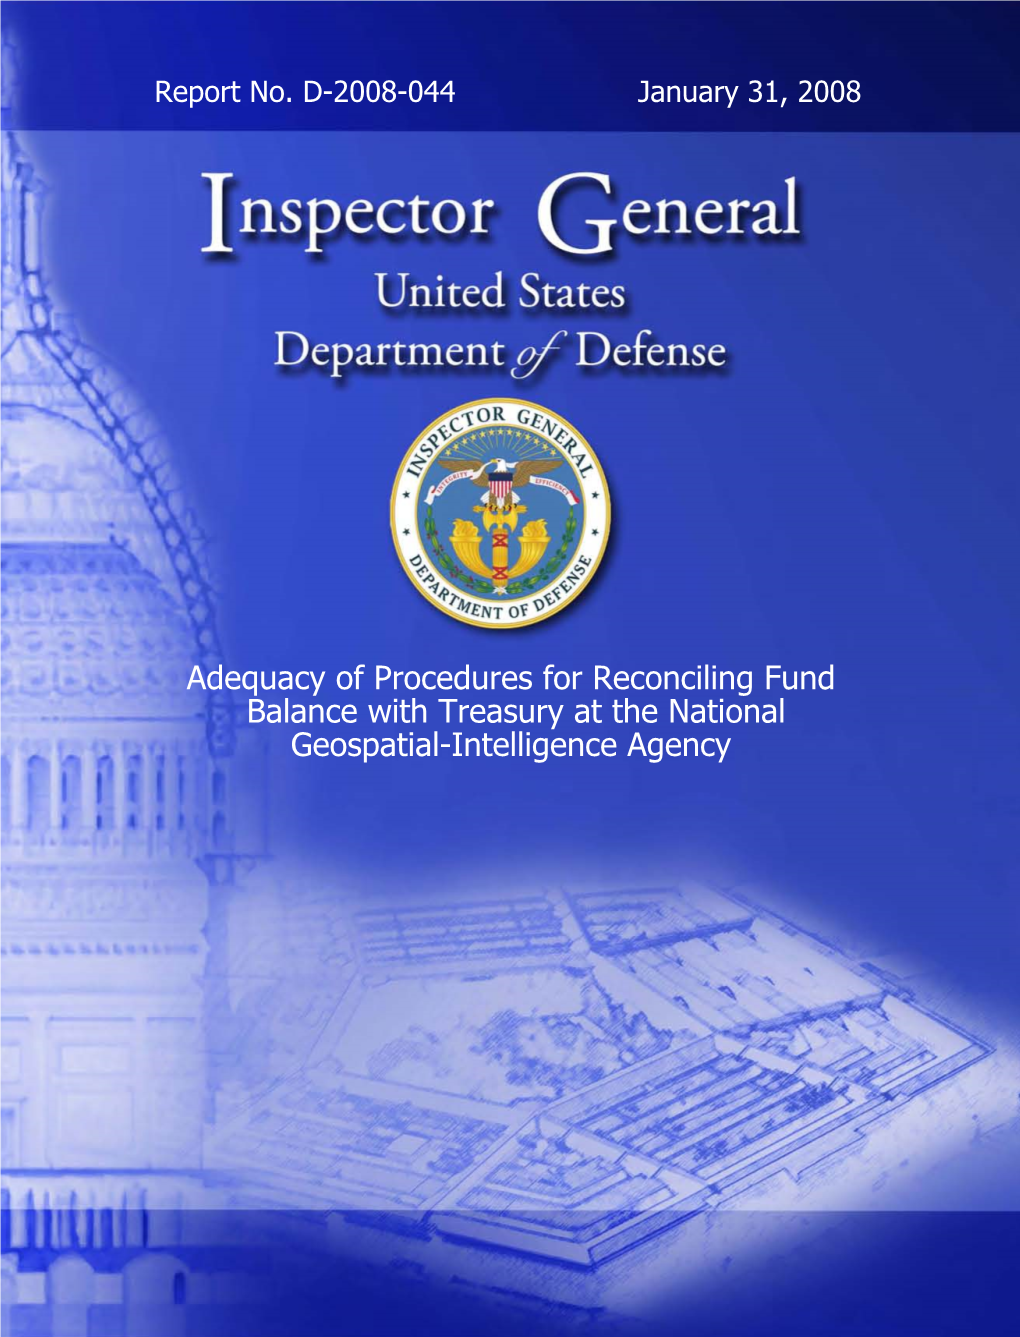 Adequacy of Procedures for Reconciling Fund Balance with Treasury at the National Geospatial-Intelligence Agency